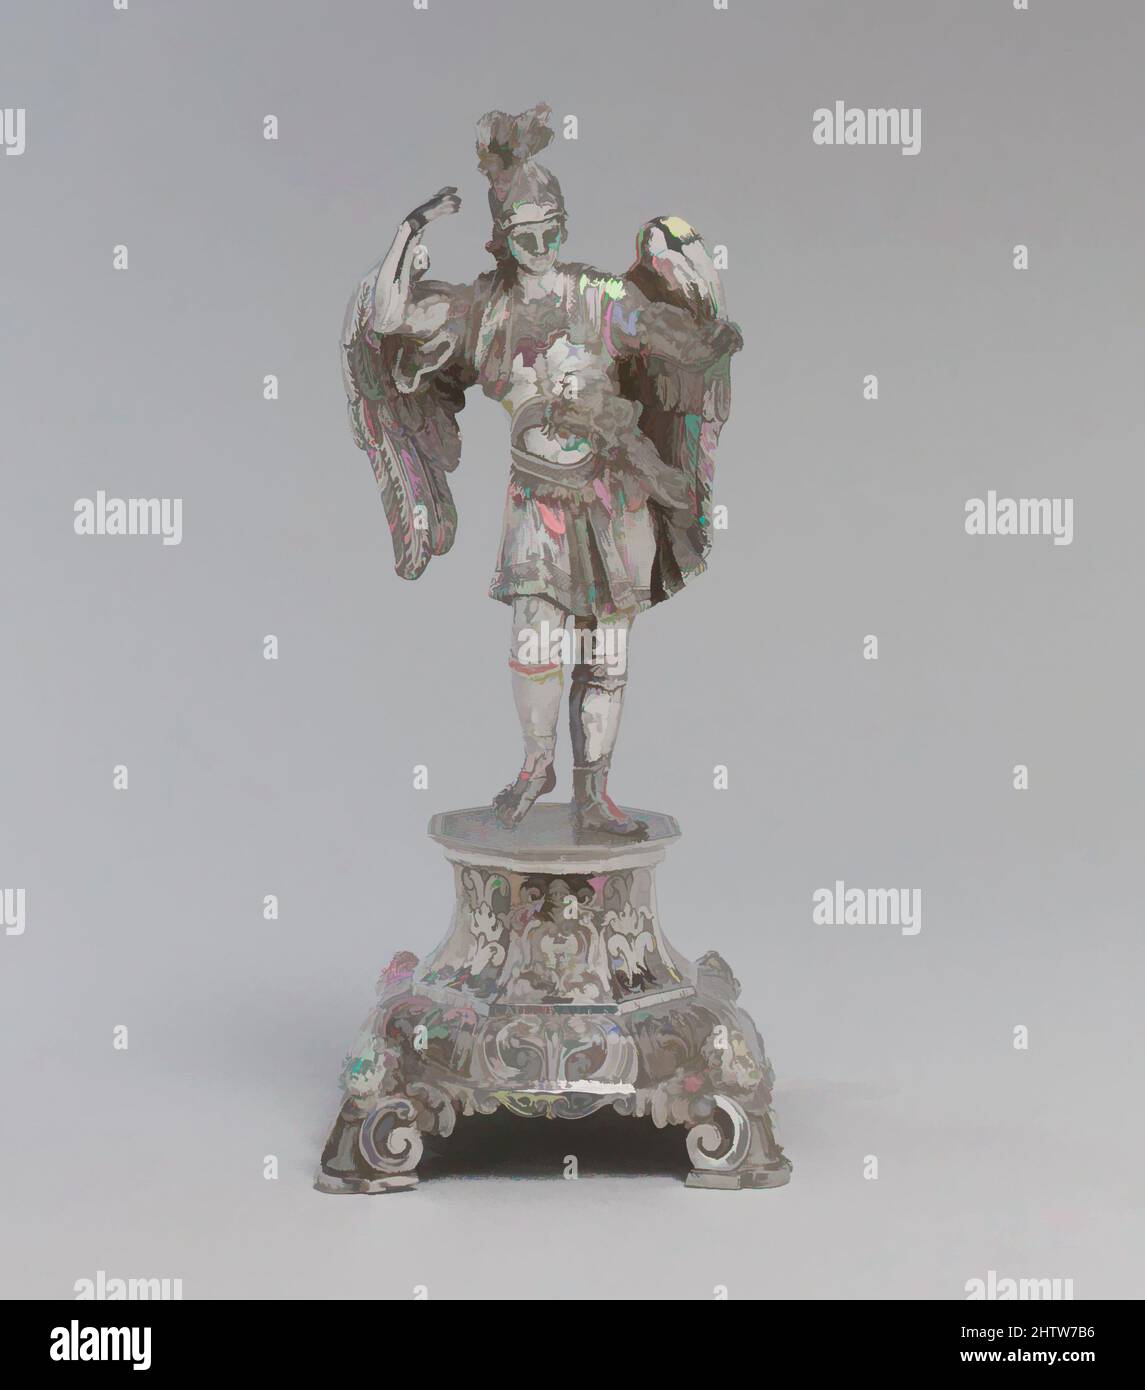 Art inspired by Saint Michael, 1740–45, Italian, Naples, Silver, Overall: 12 1/4 x 5 1/2 x 5 1/2 in. (31.1 x 14 x 14 cm), Sculpture-Miniature, Probably by Gaetano Fumo (active 1737–59), Fumo is said to have ceased working silver in 1745 in favor of employment as an engraver at, Classic works modernized by Artotop with a splash of modernity. Shapes, color and value, eye-catching visual impact on art. Emotions through freedom of artworks in a contemporary way. A timeless message pursuing a wildly creative new direction. Artists turning to the digital medium and creating the Artotop NFT Stock Photo